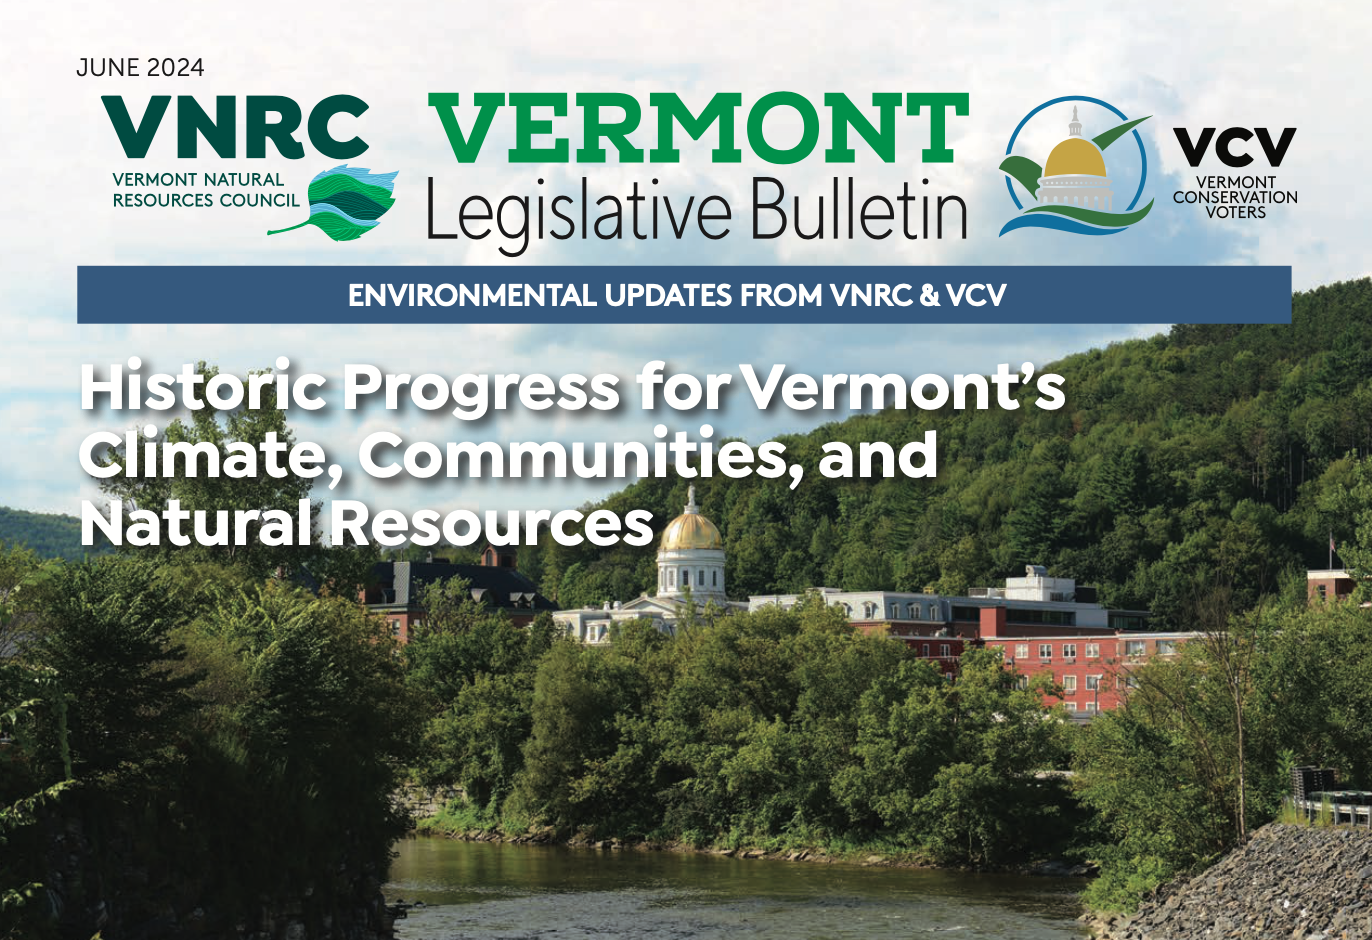 2024 Vermont Legislative Bulletin cover: Vermont State House seen from across the Winooski River